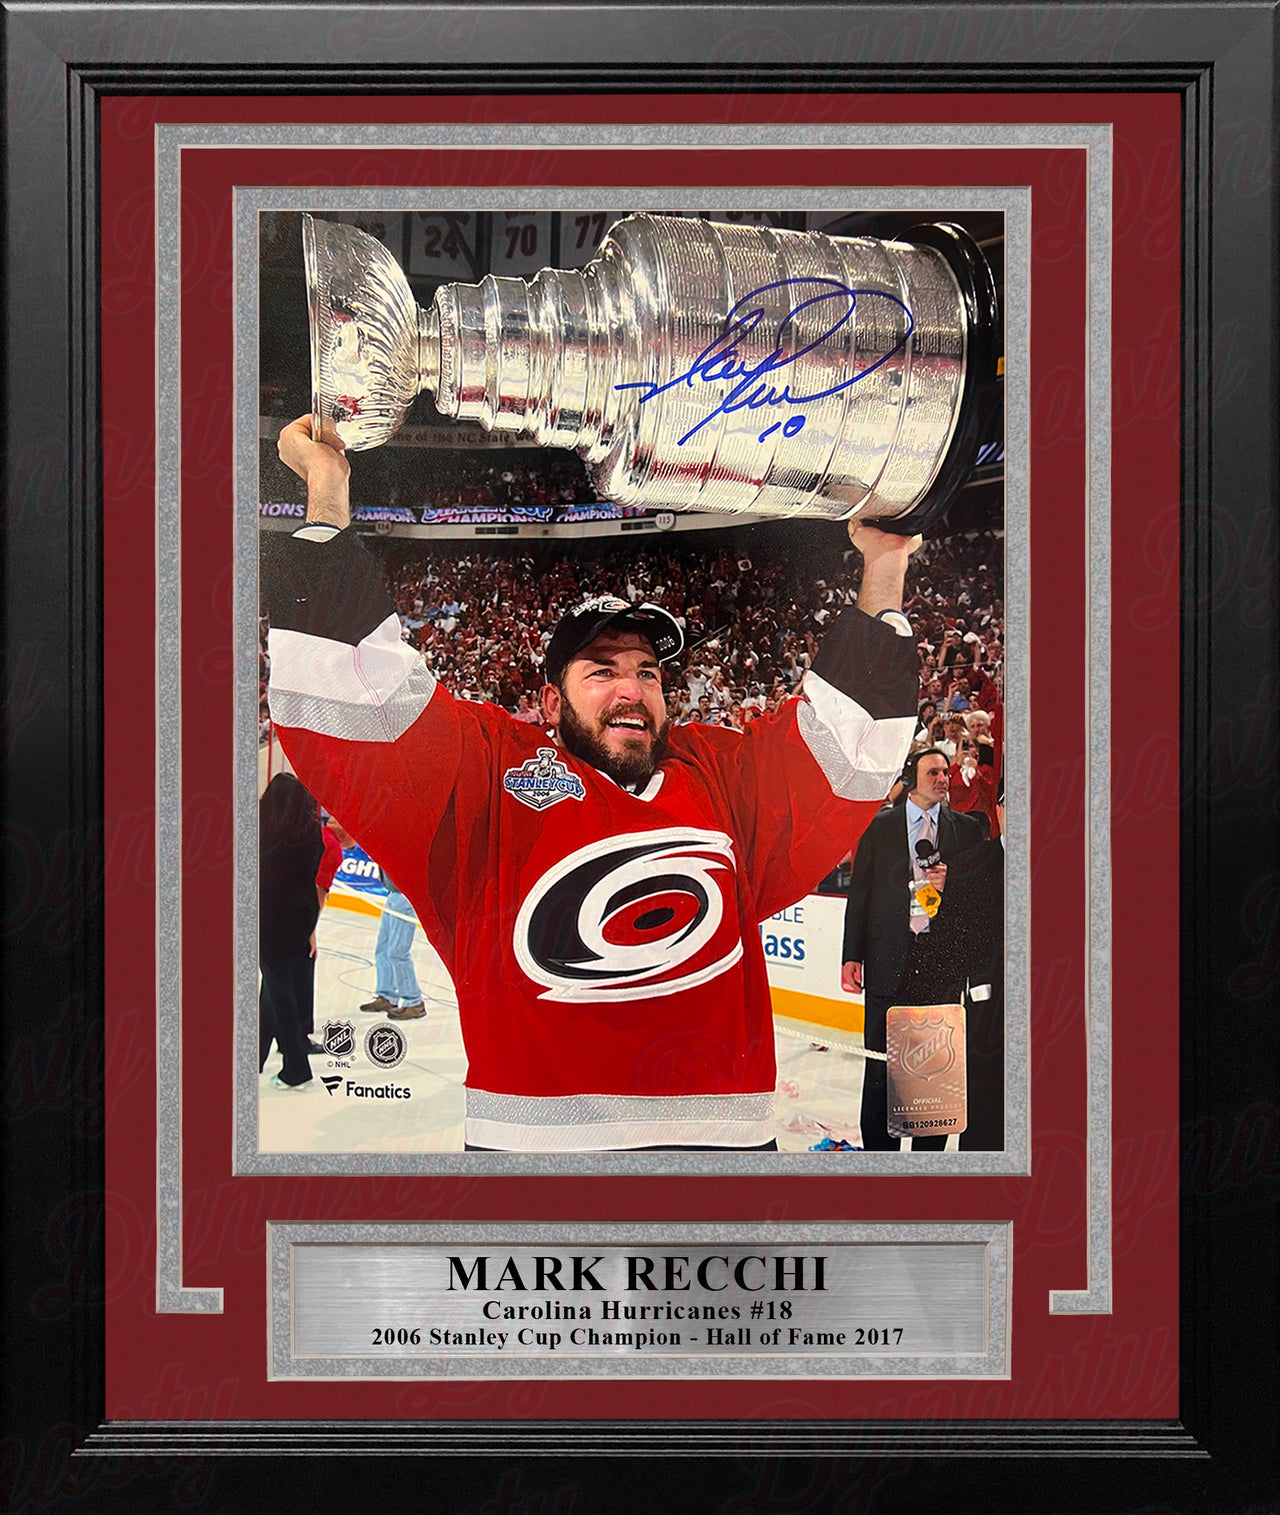 Mark Recchi 2006 Stanley Cup Champions Carolina Hurricanes Autographed 8" x 10" Framed Hockey Photo